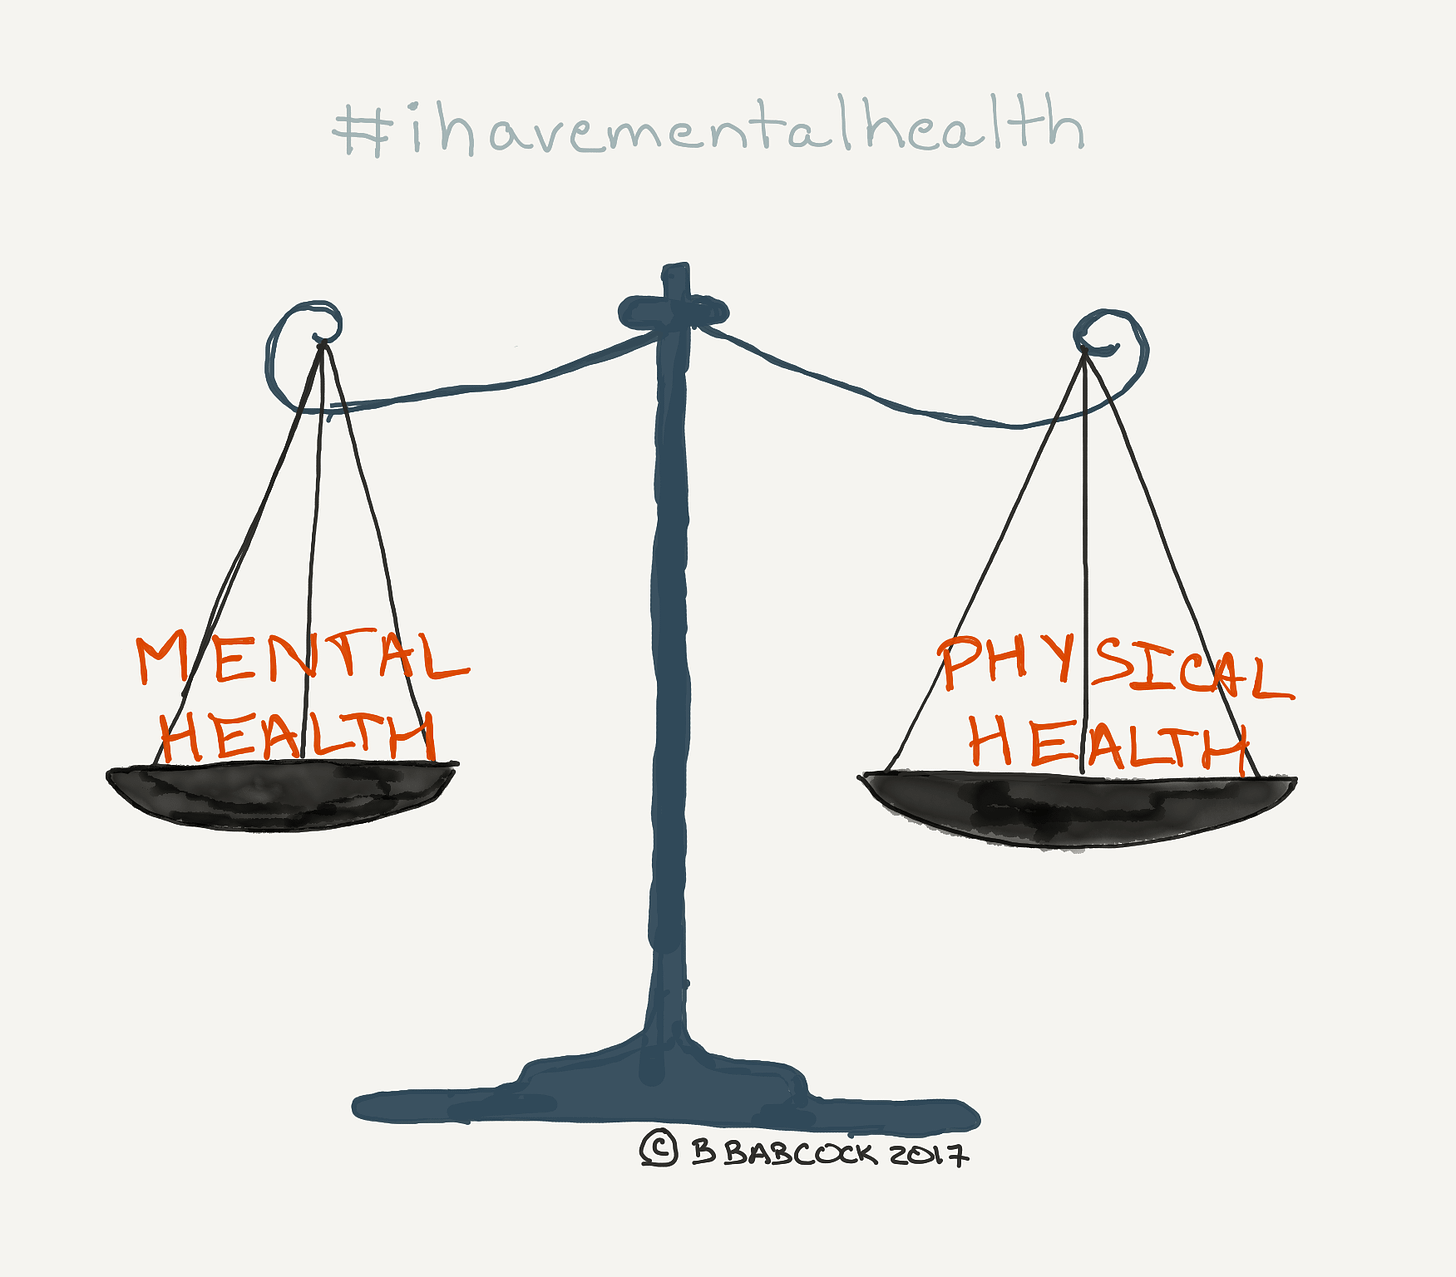 Why your mental health is important when living with chronic illness  #ihavementalhealth